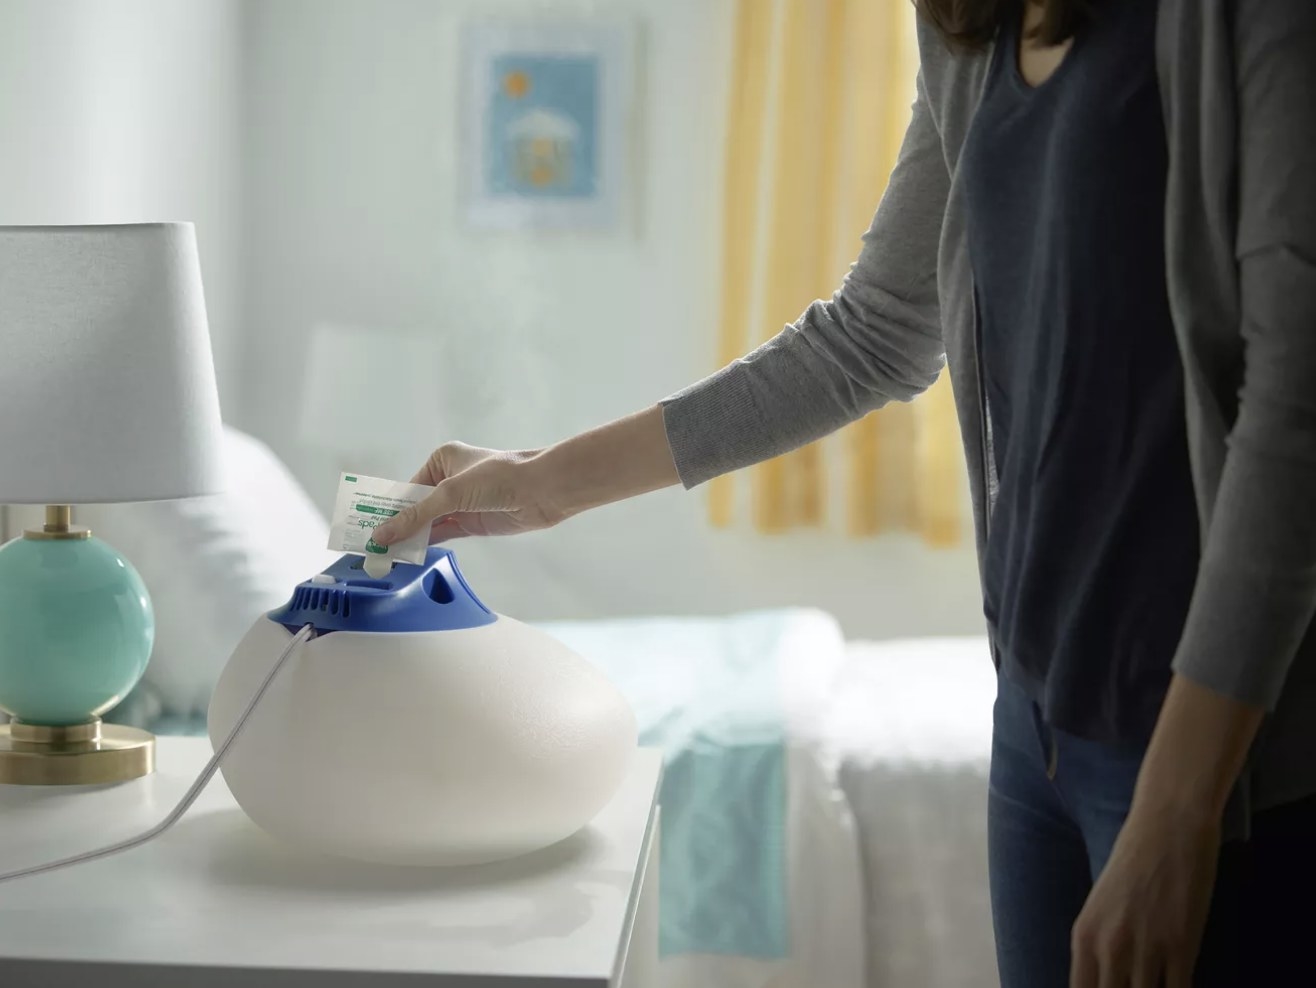 An adult pours a packet into the blue top of the pearly colored humidifier